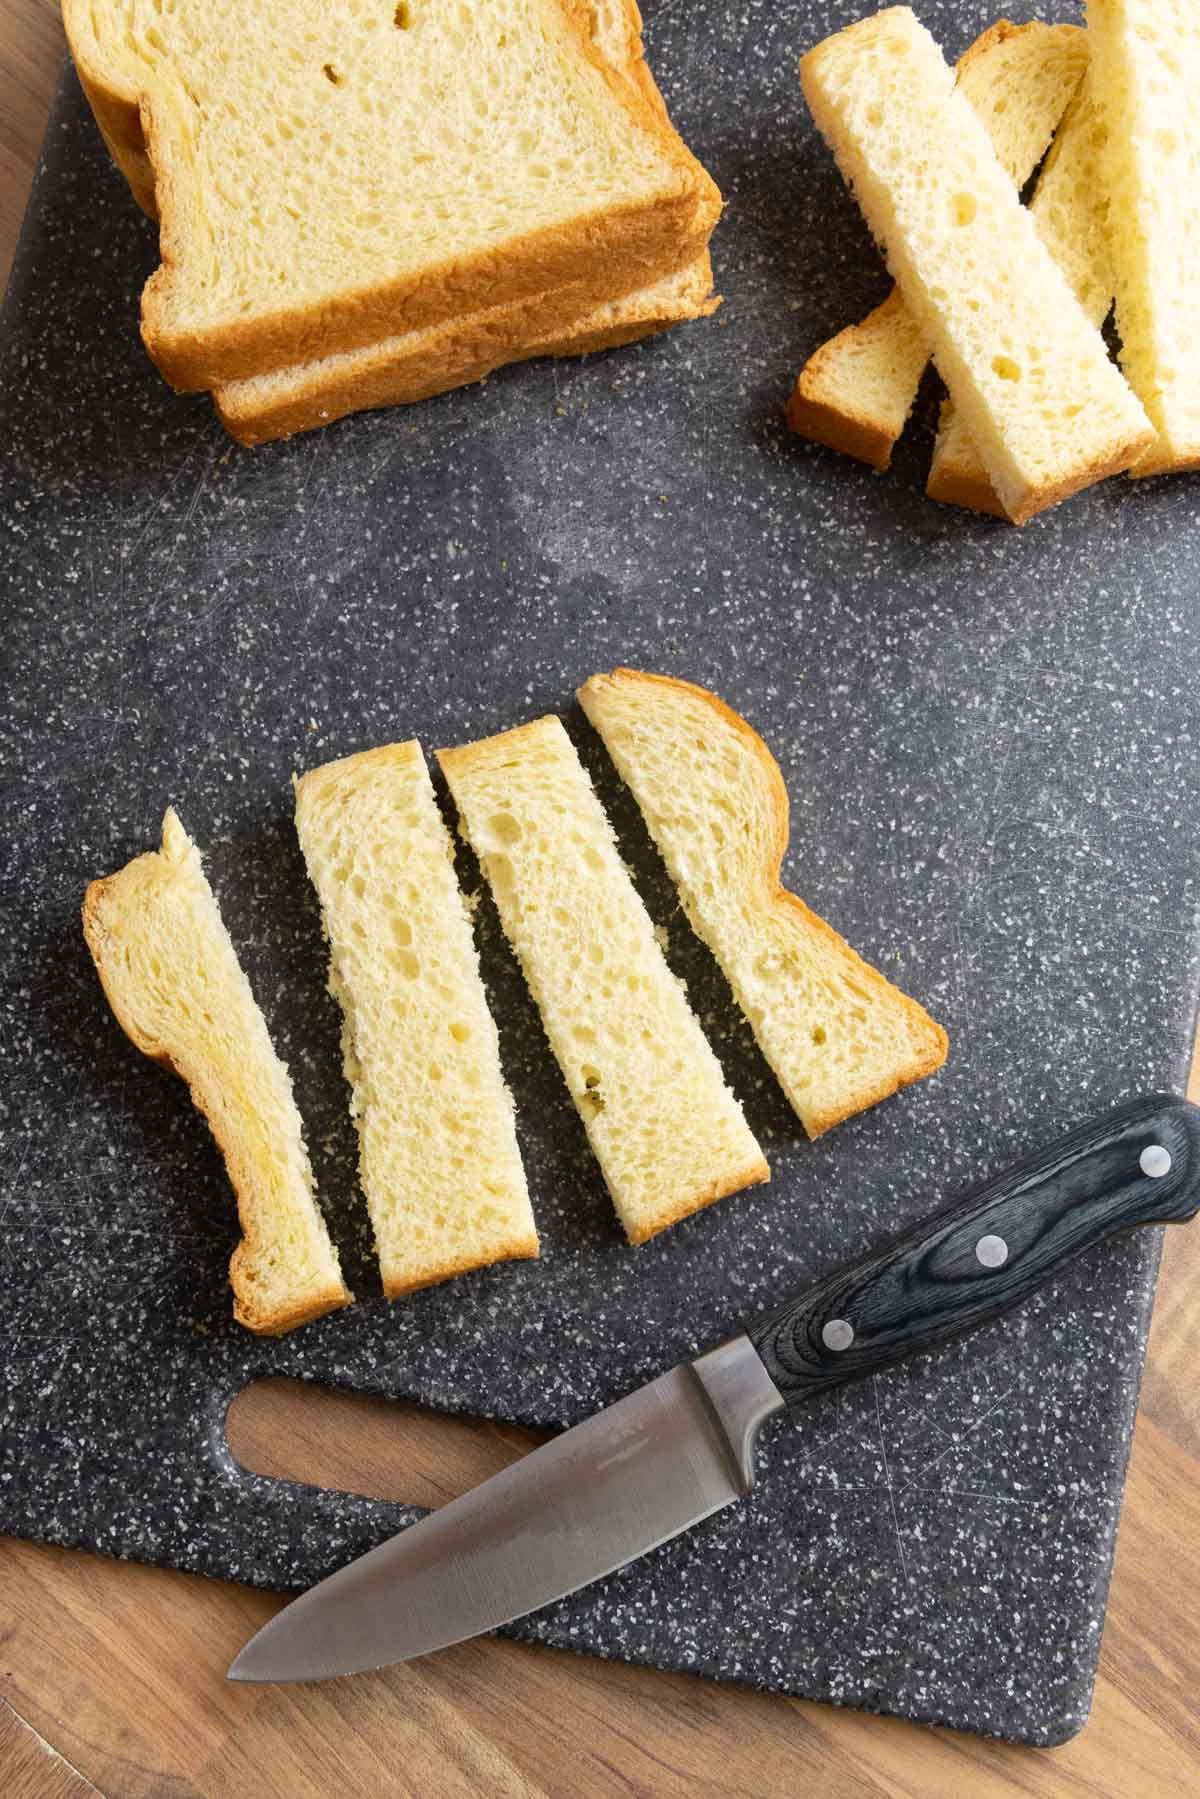 French Toast Sticks sliced bread pieces and knife on cutting board